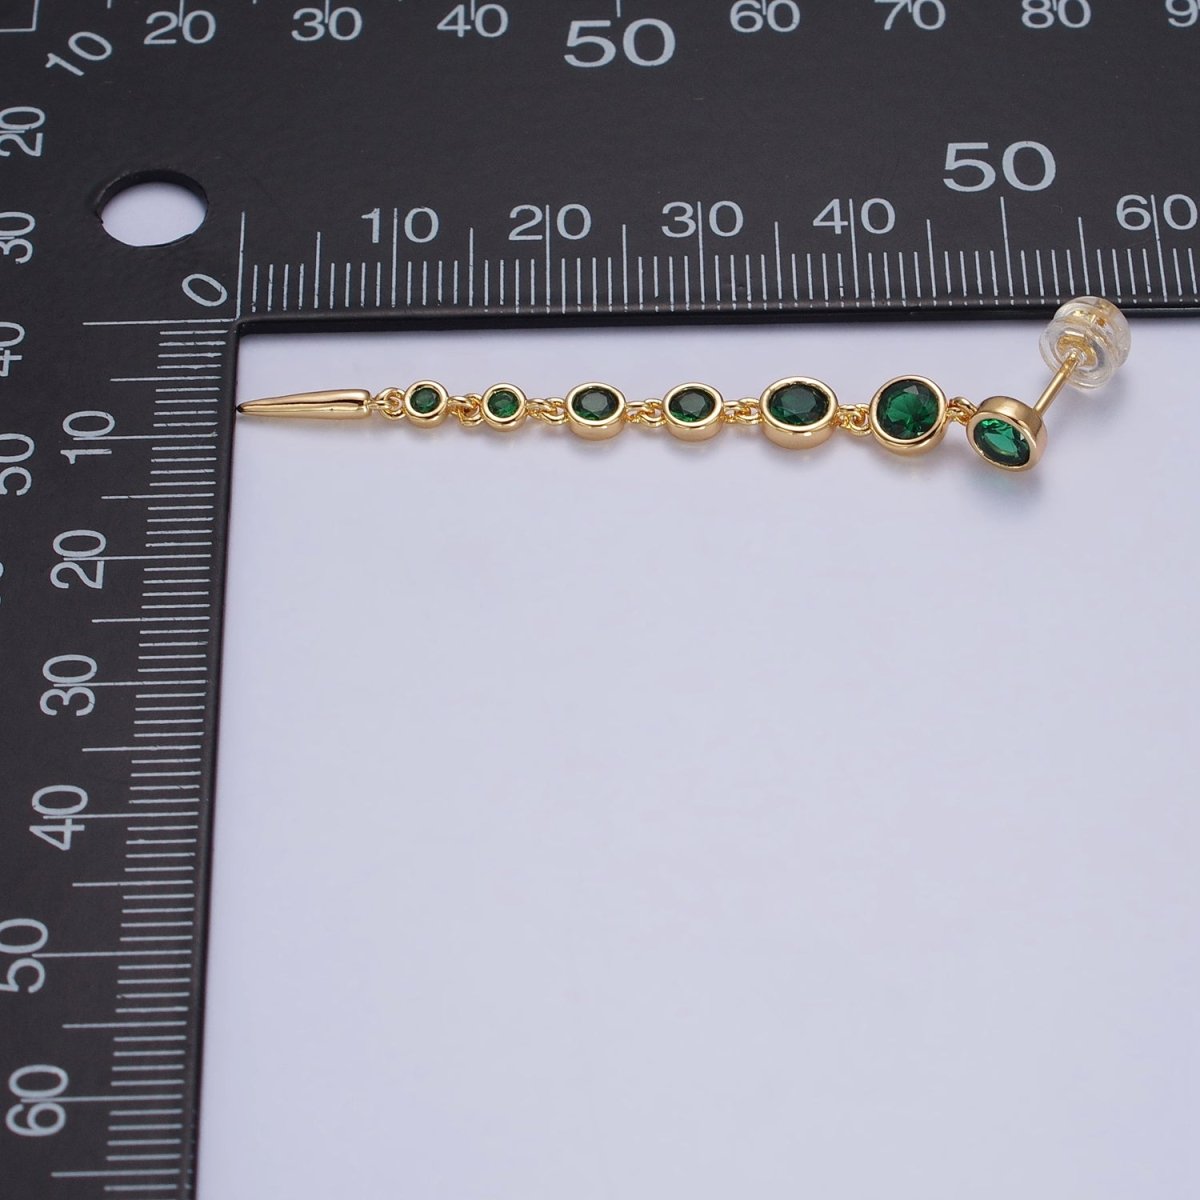 2 Inches Round Green, Clear CZ Spike Long Linear Drop Earrings in Gold & Silver | AB168 AB169 AB171 - DLUXCA